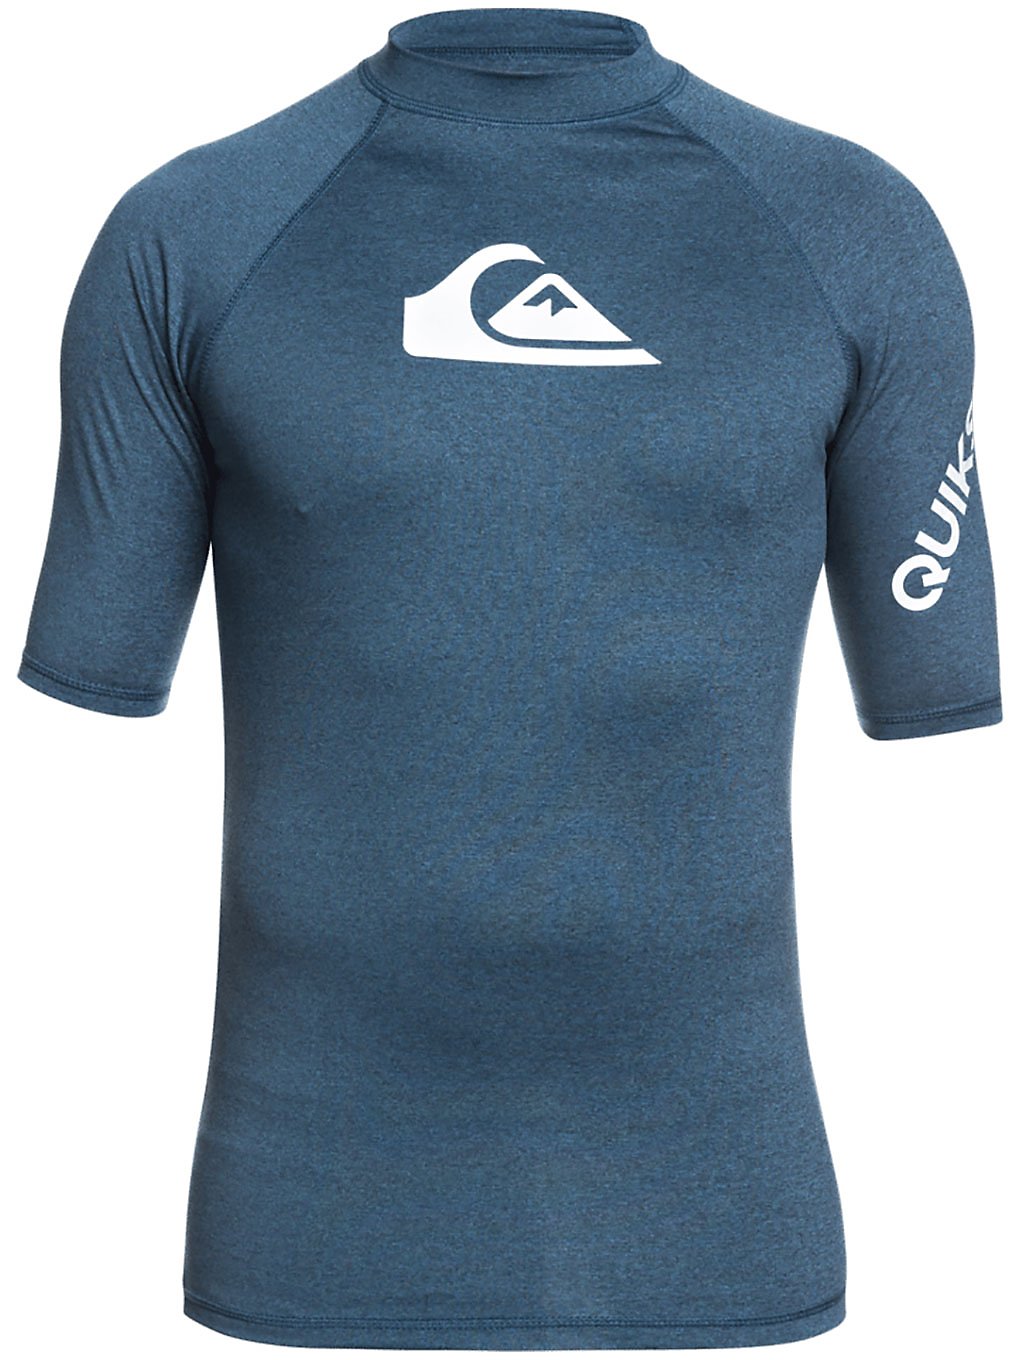 Quiksilver All Time Lycra majolica blue heather